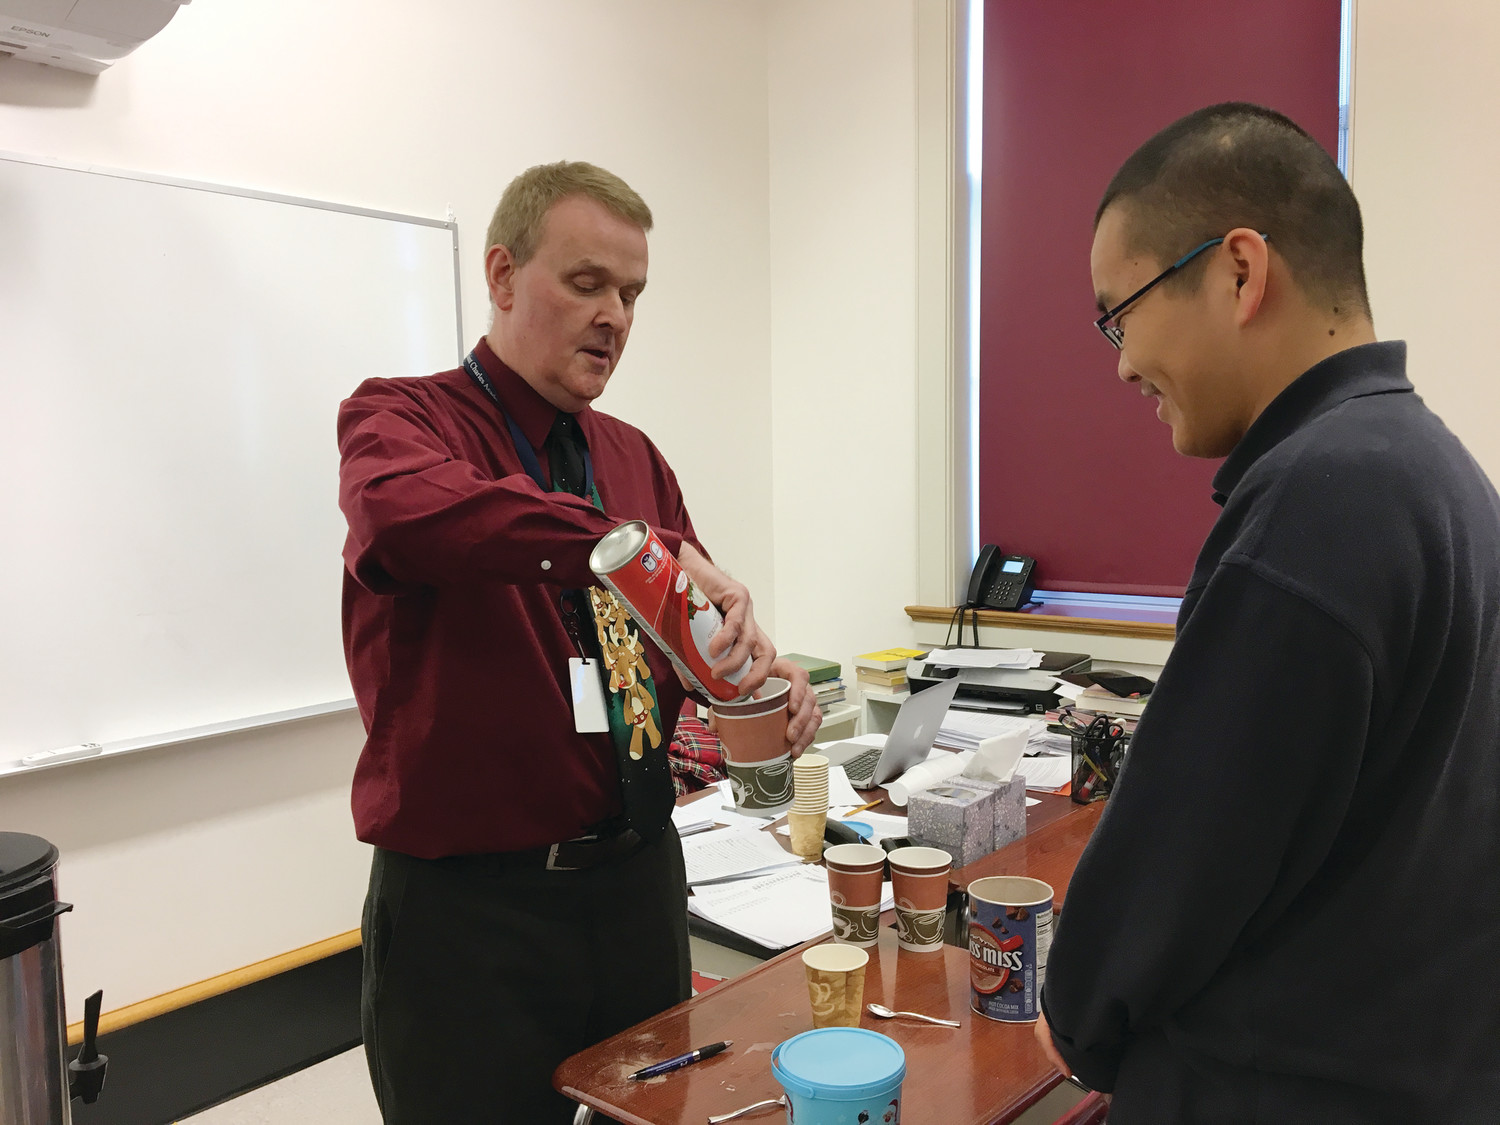 John Guevremont, English Department chair, makes hot chocolate with Wei (Peter) Li, a student from China. Guevremont shared that the exchange students at Mount Saint Charles Academy are “diligent, hardworking, respectful and appreciative.”